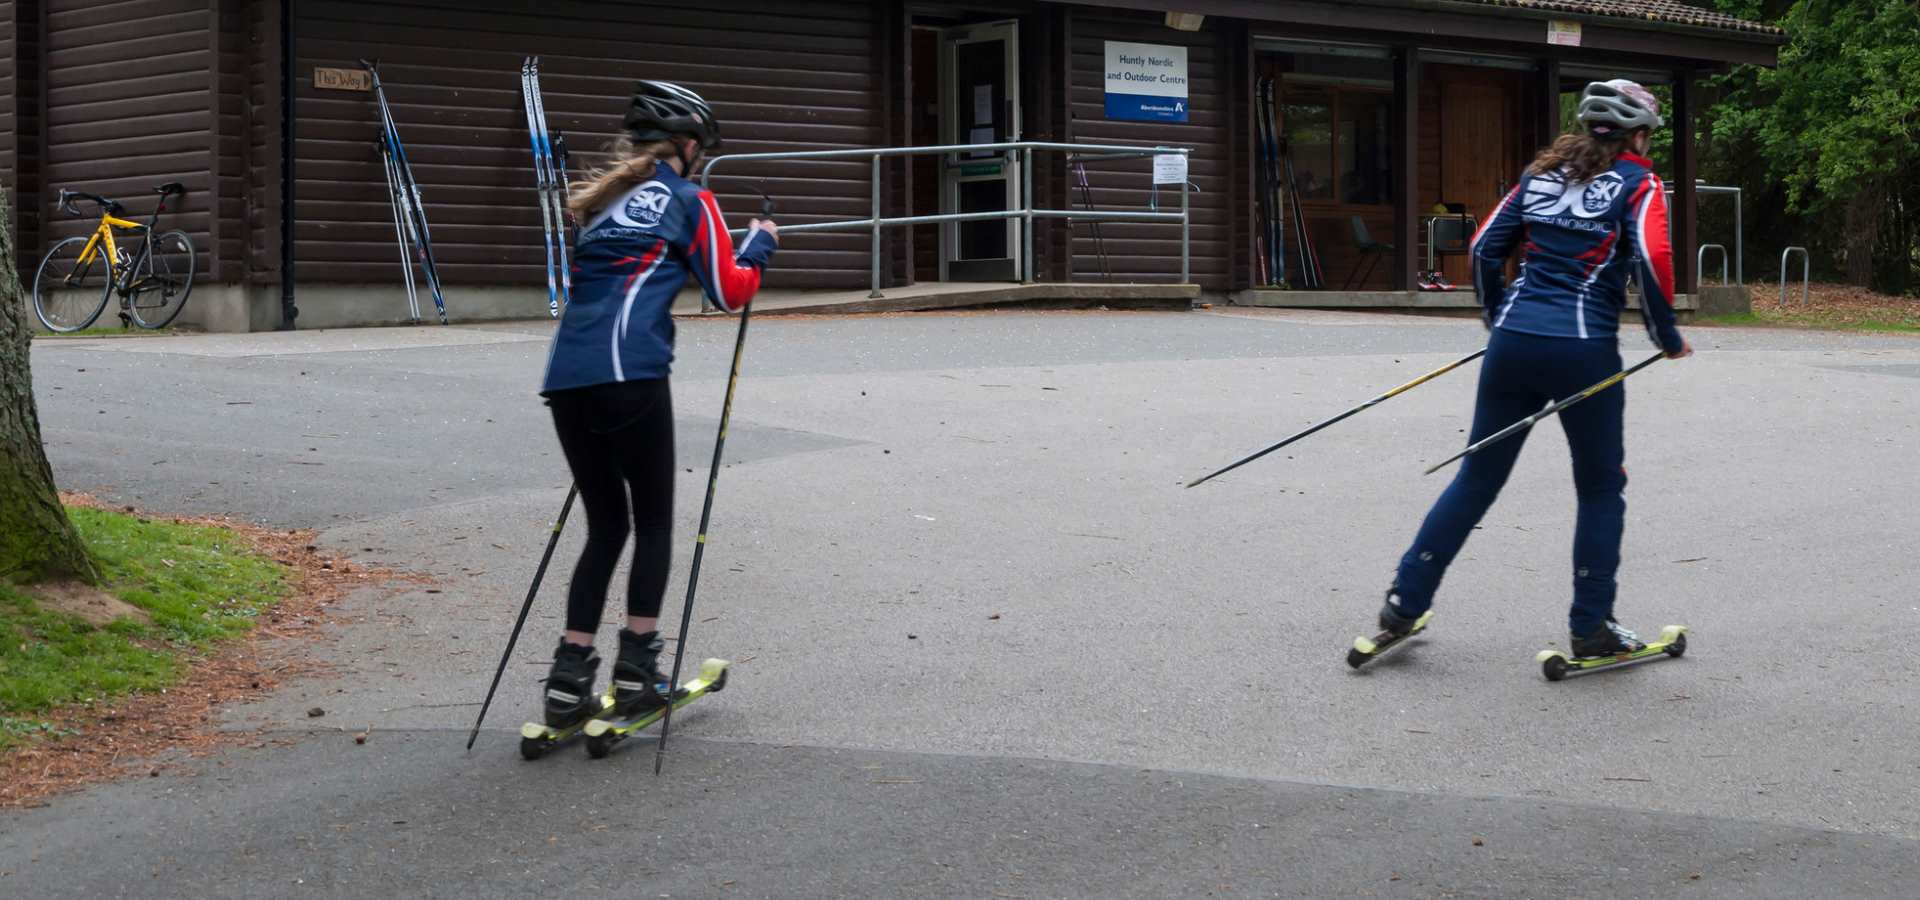 two adults  racing on roller skis 